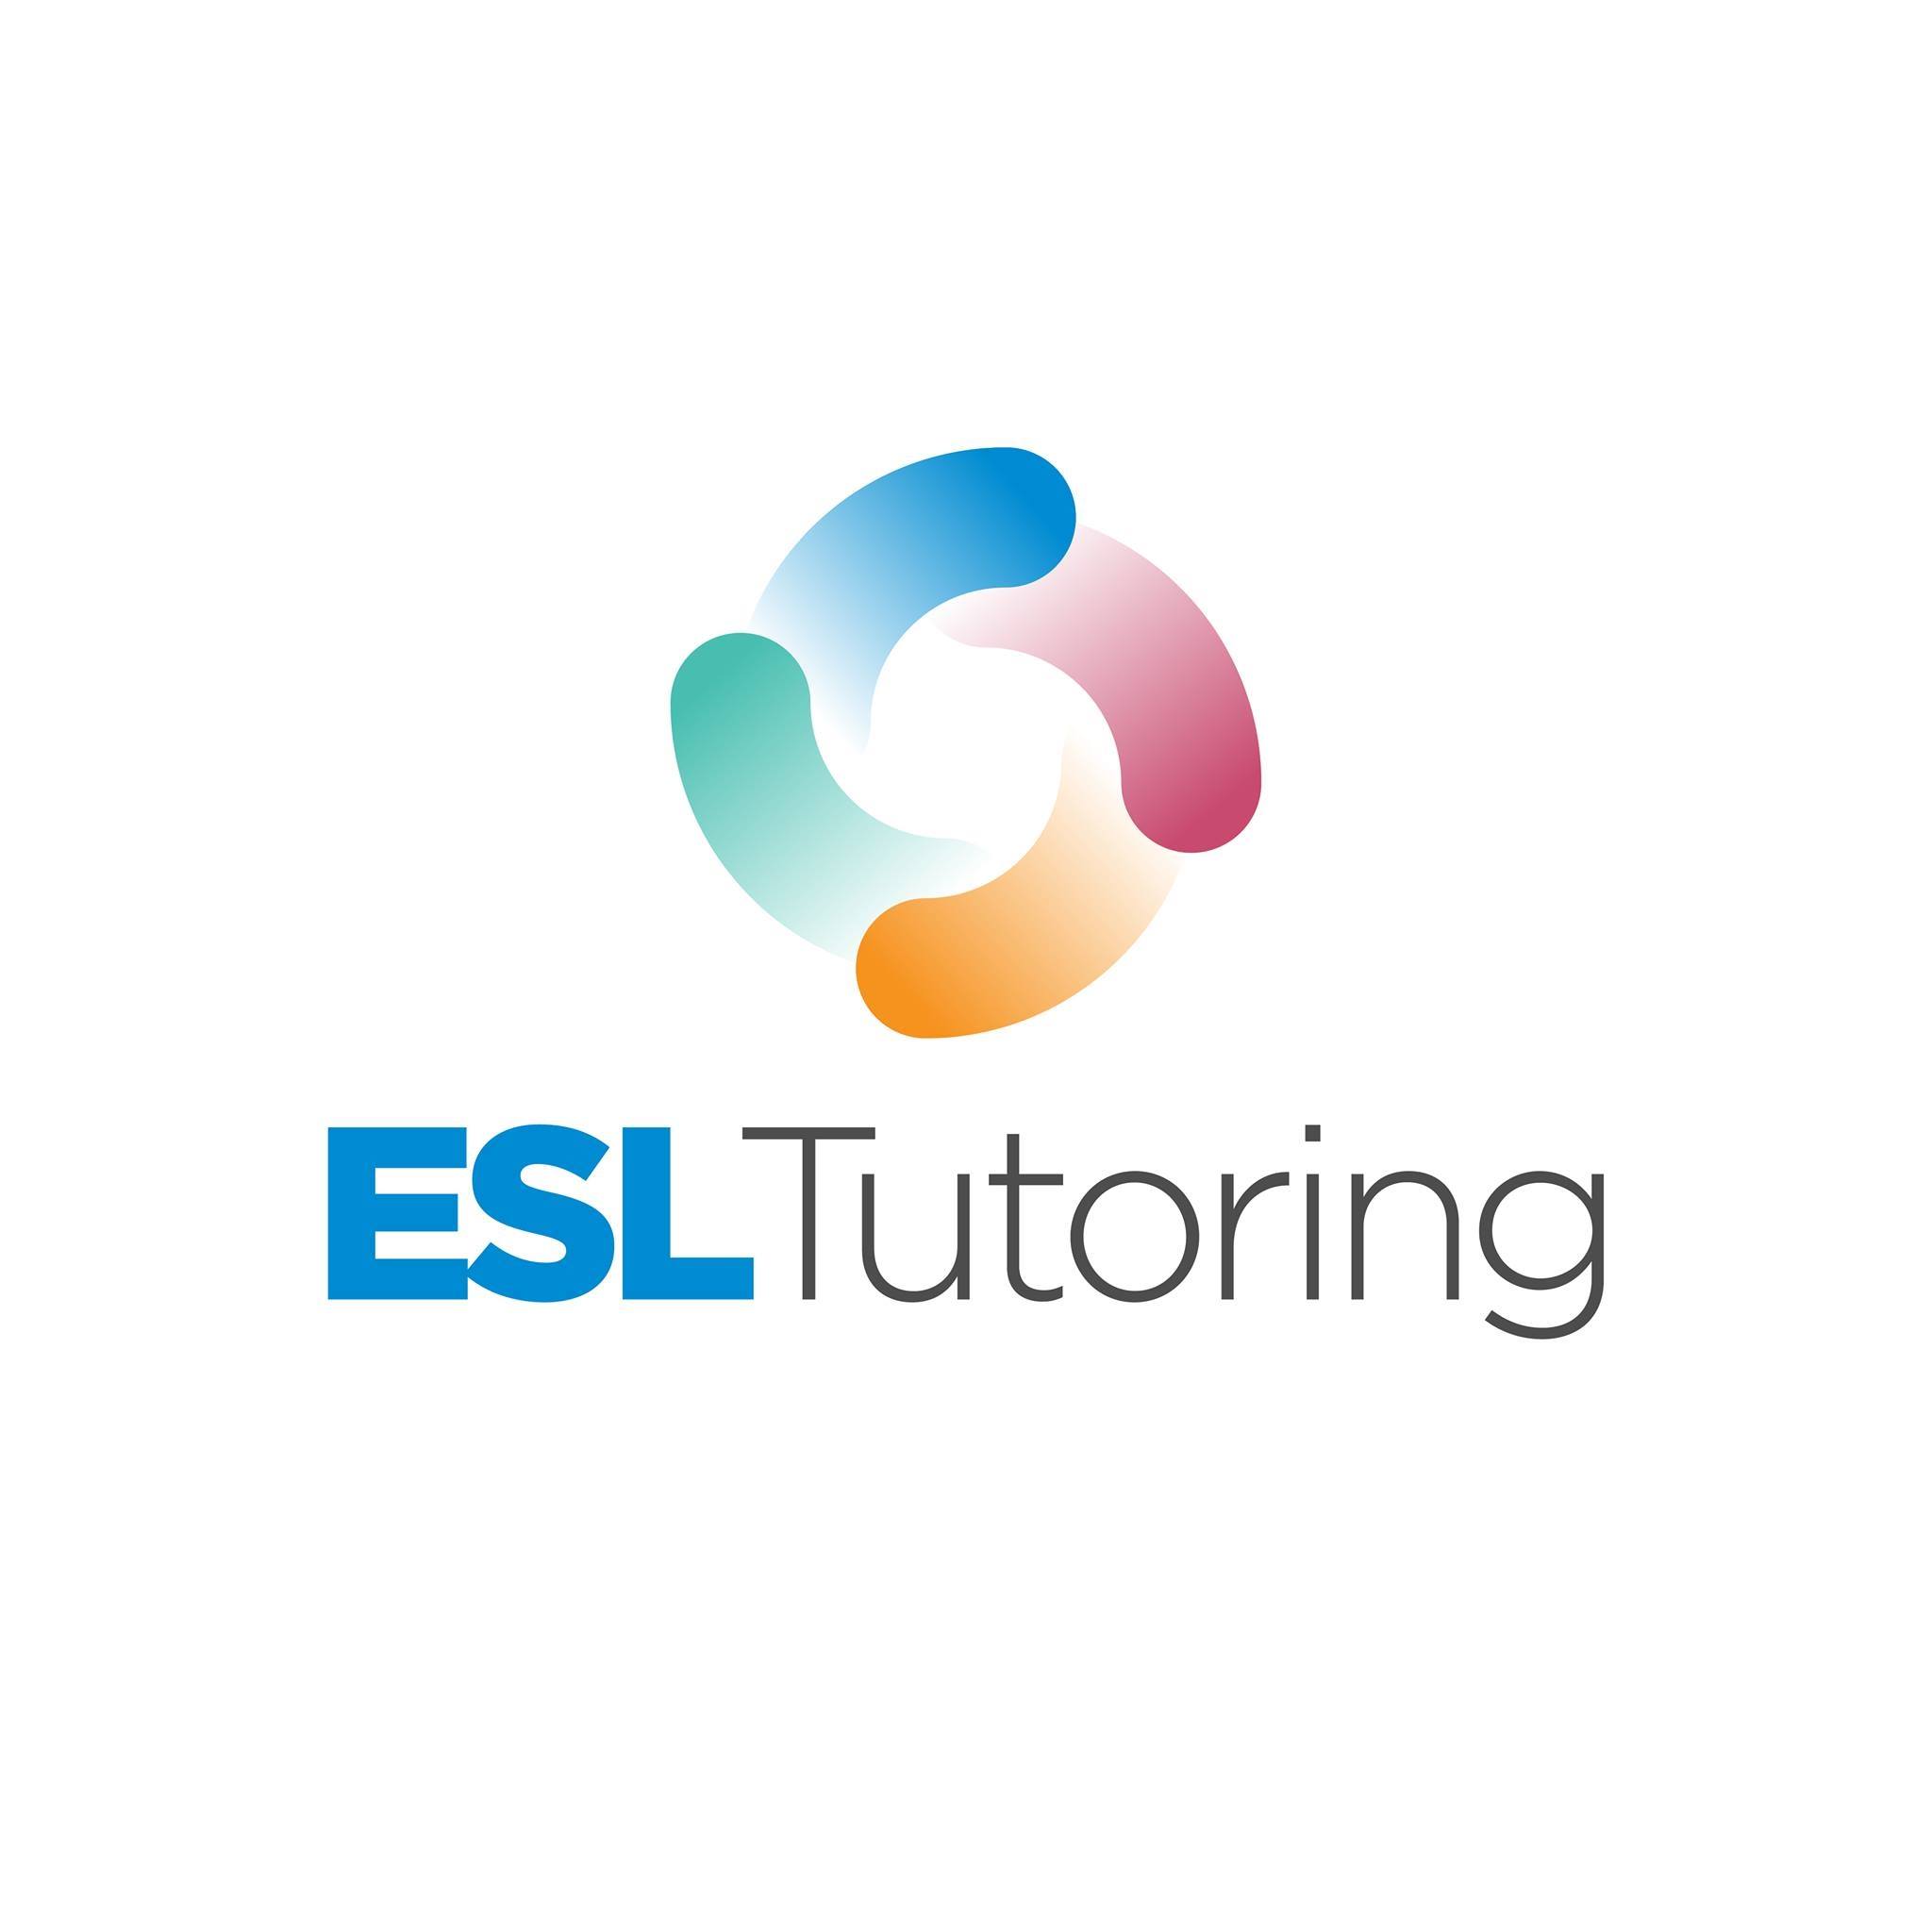 Become Fluent the Easy Way: With an IELTS Tutor Melbourne